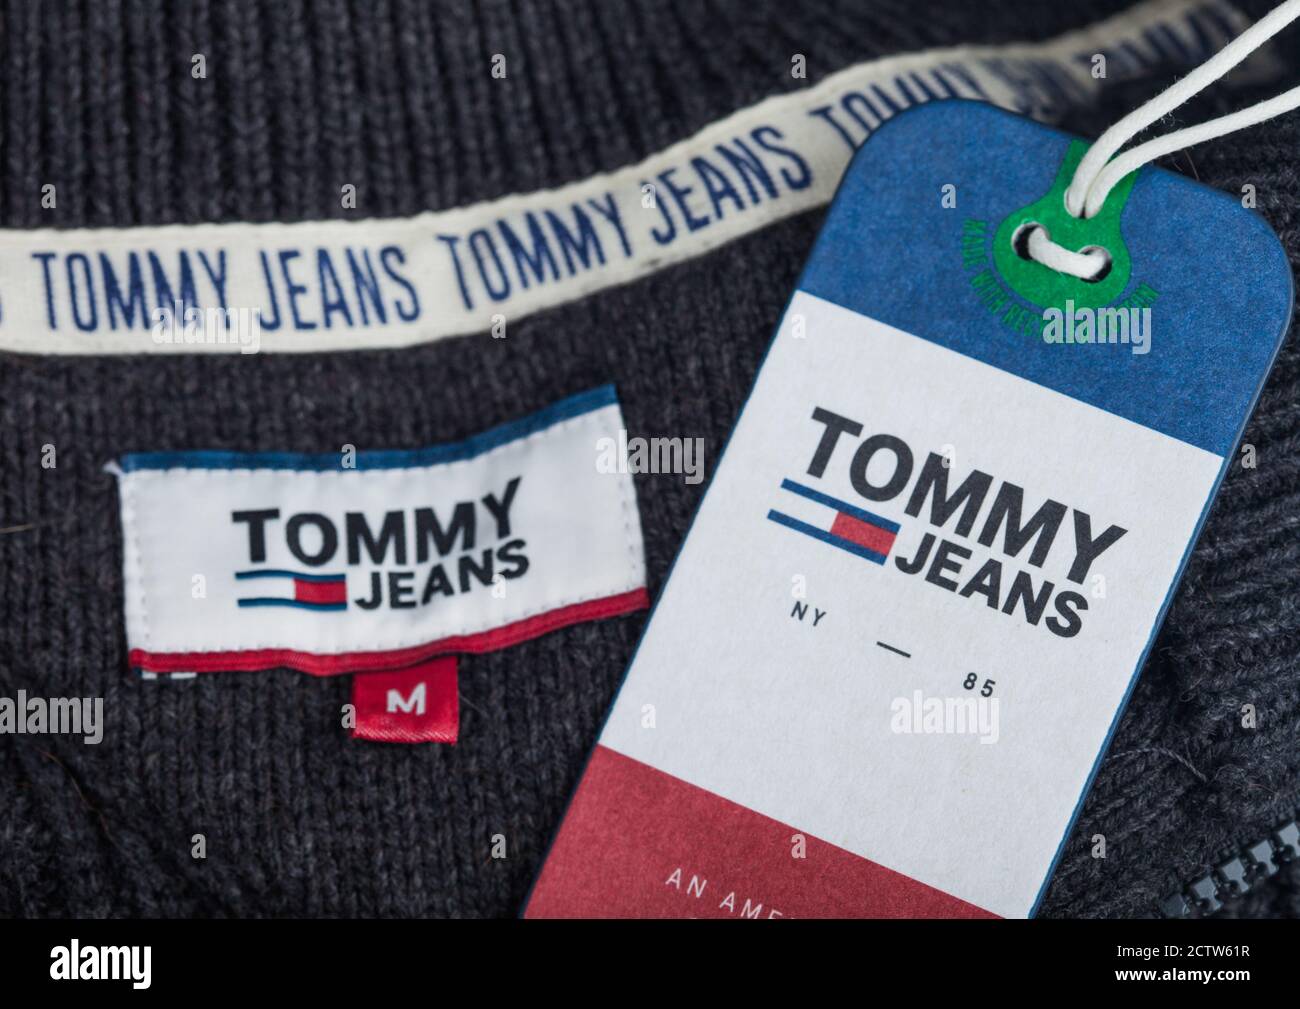 LONDON, UK - SEPTEMBER 09, 2020:Tommy Hilfiger label and clothing tag on  grey wool fabric Stock Photo - Alamy